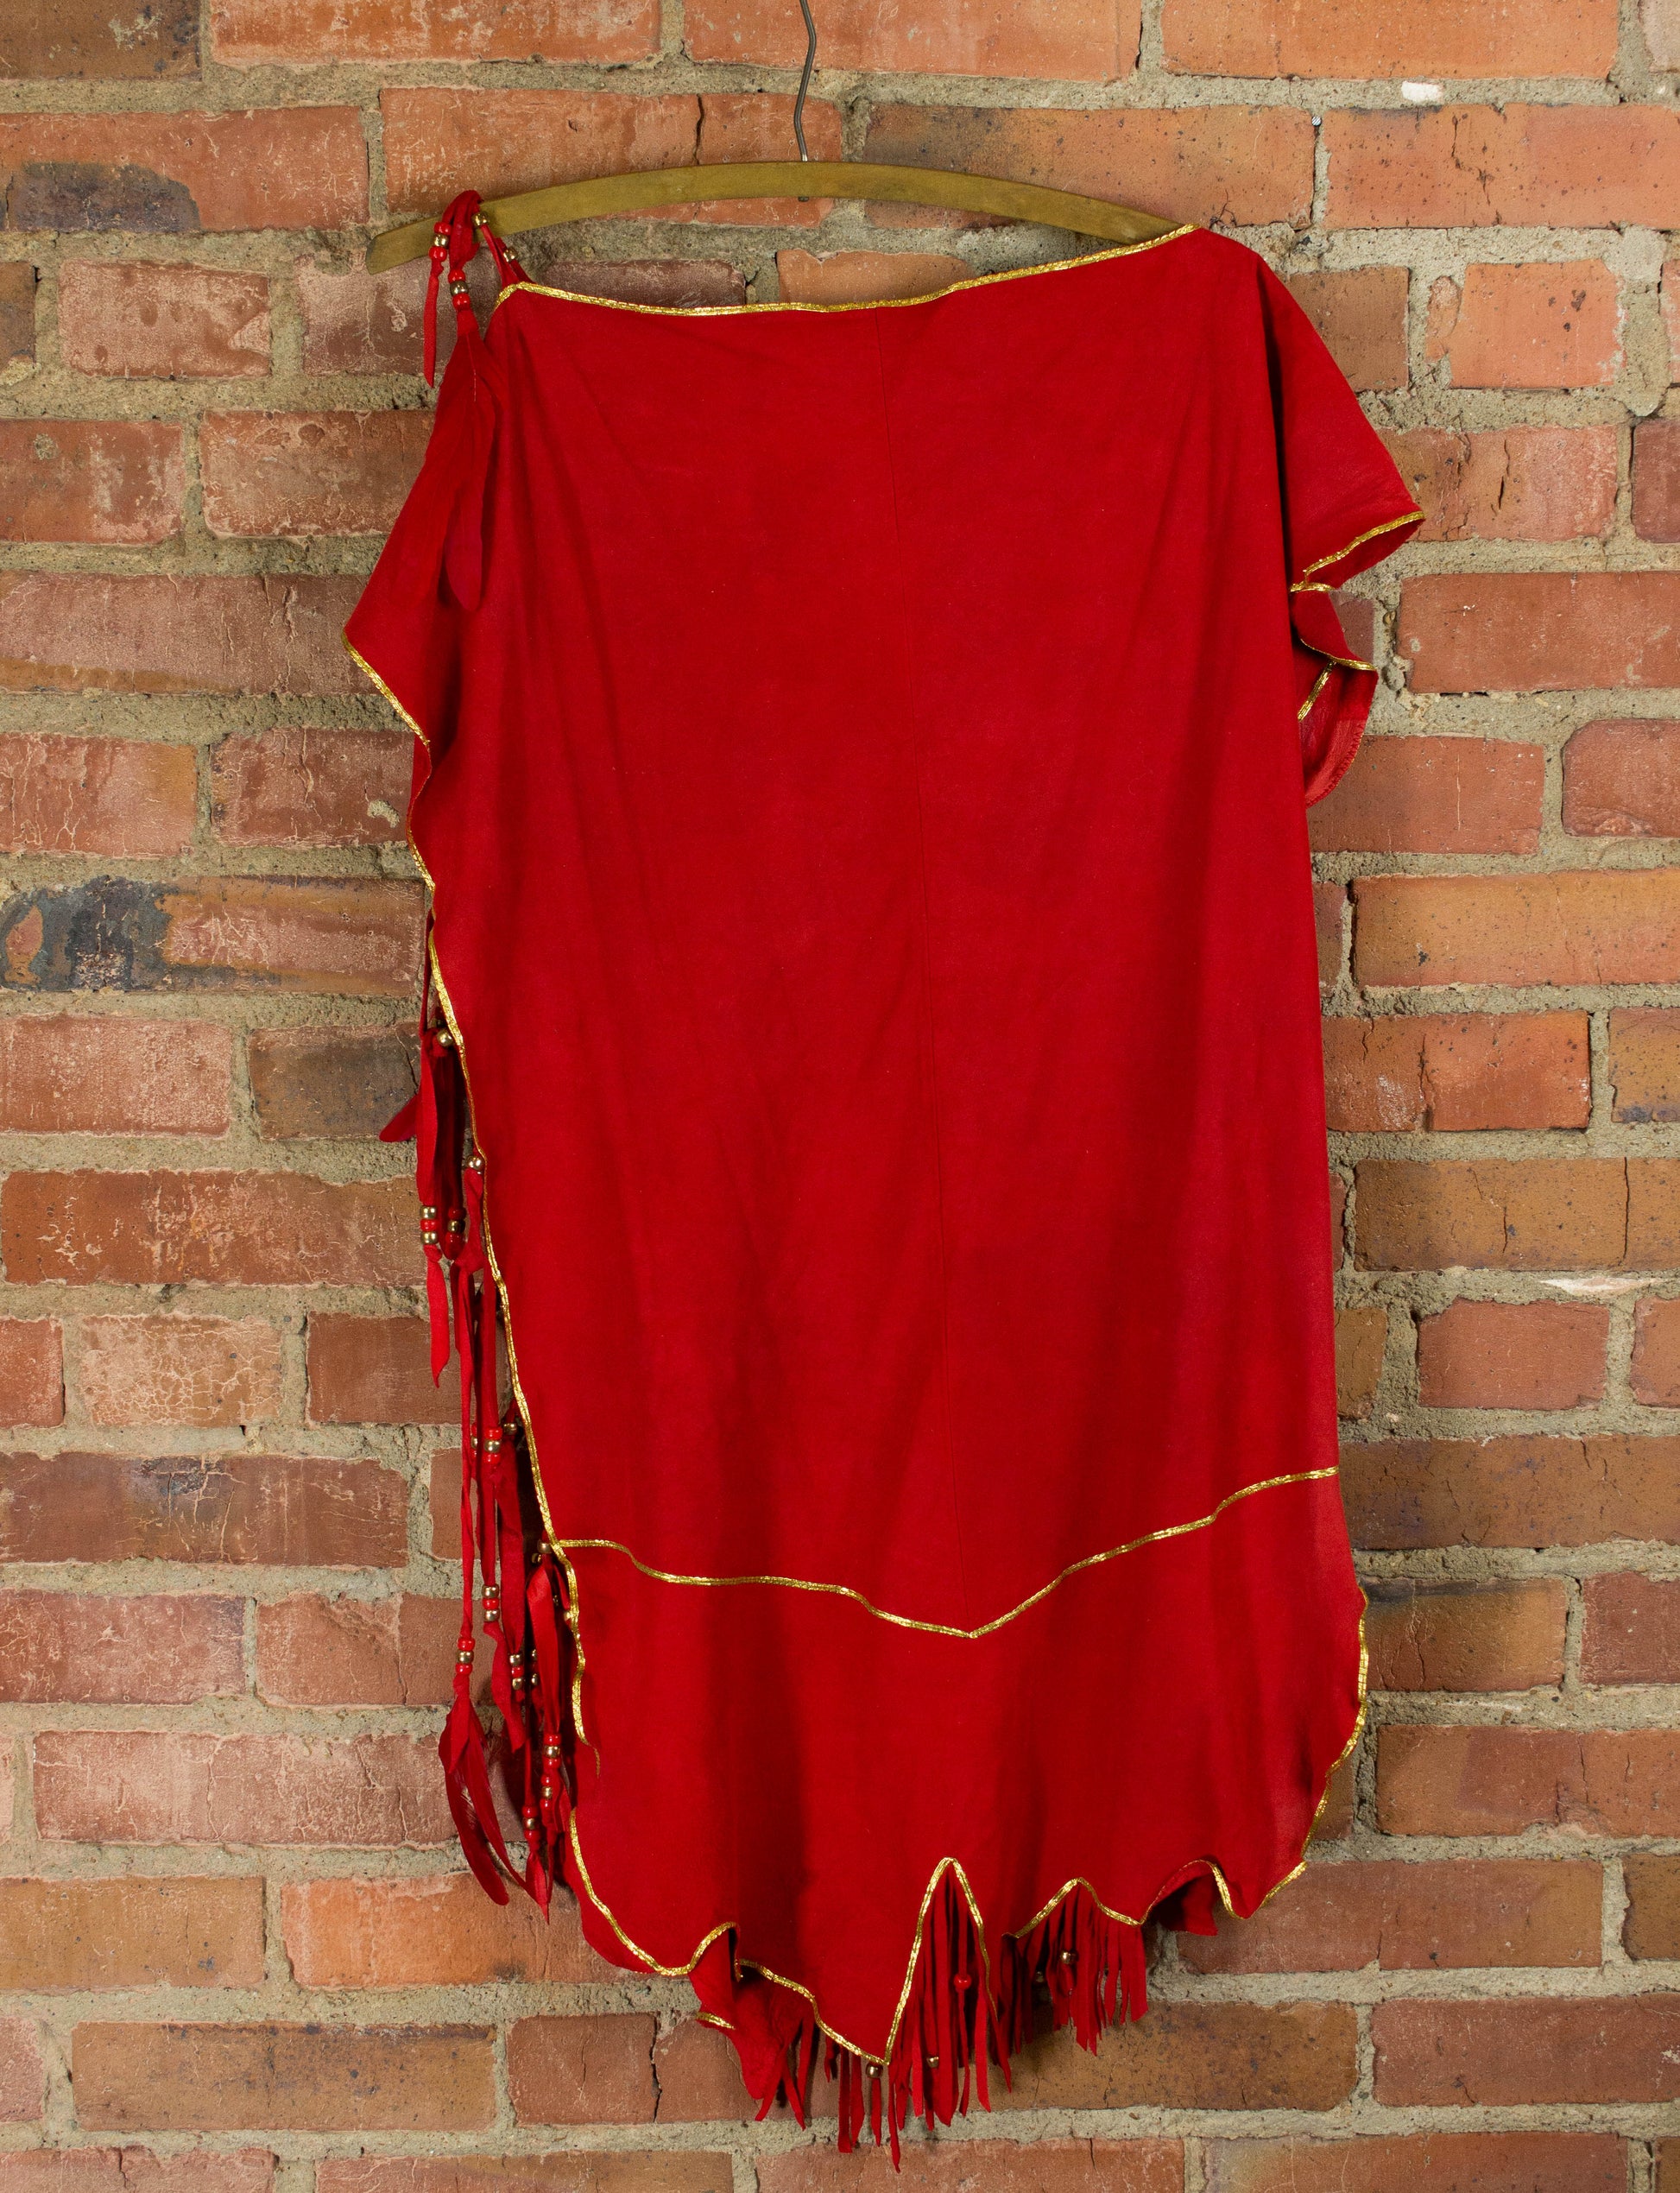 Vintage Women's Red Buckskin Suede Feather and Beaded Dress Free Size